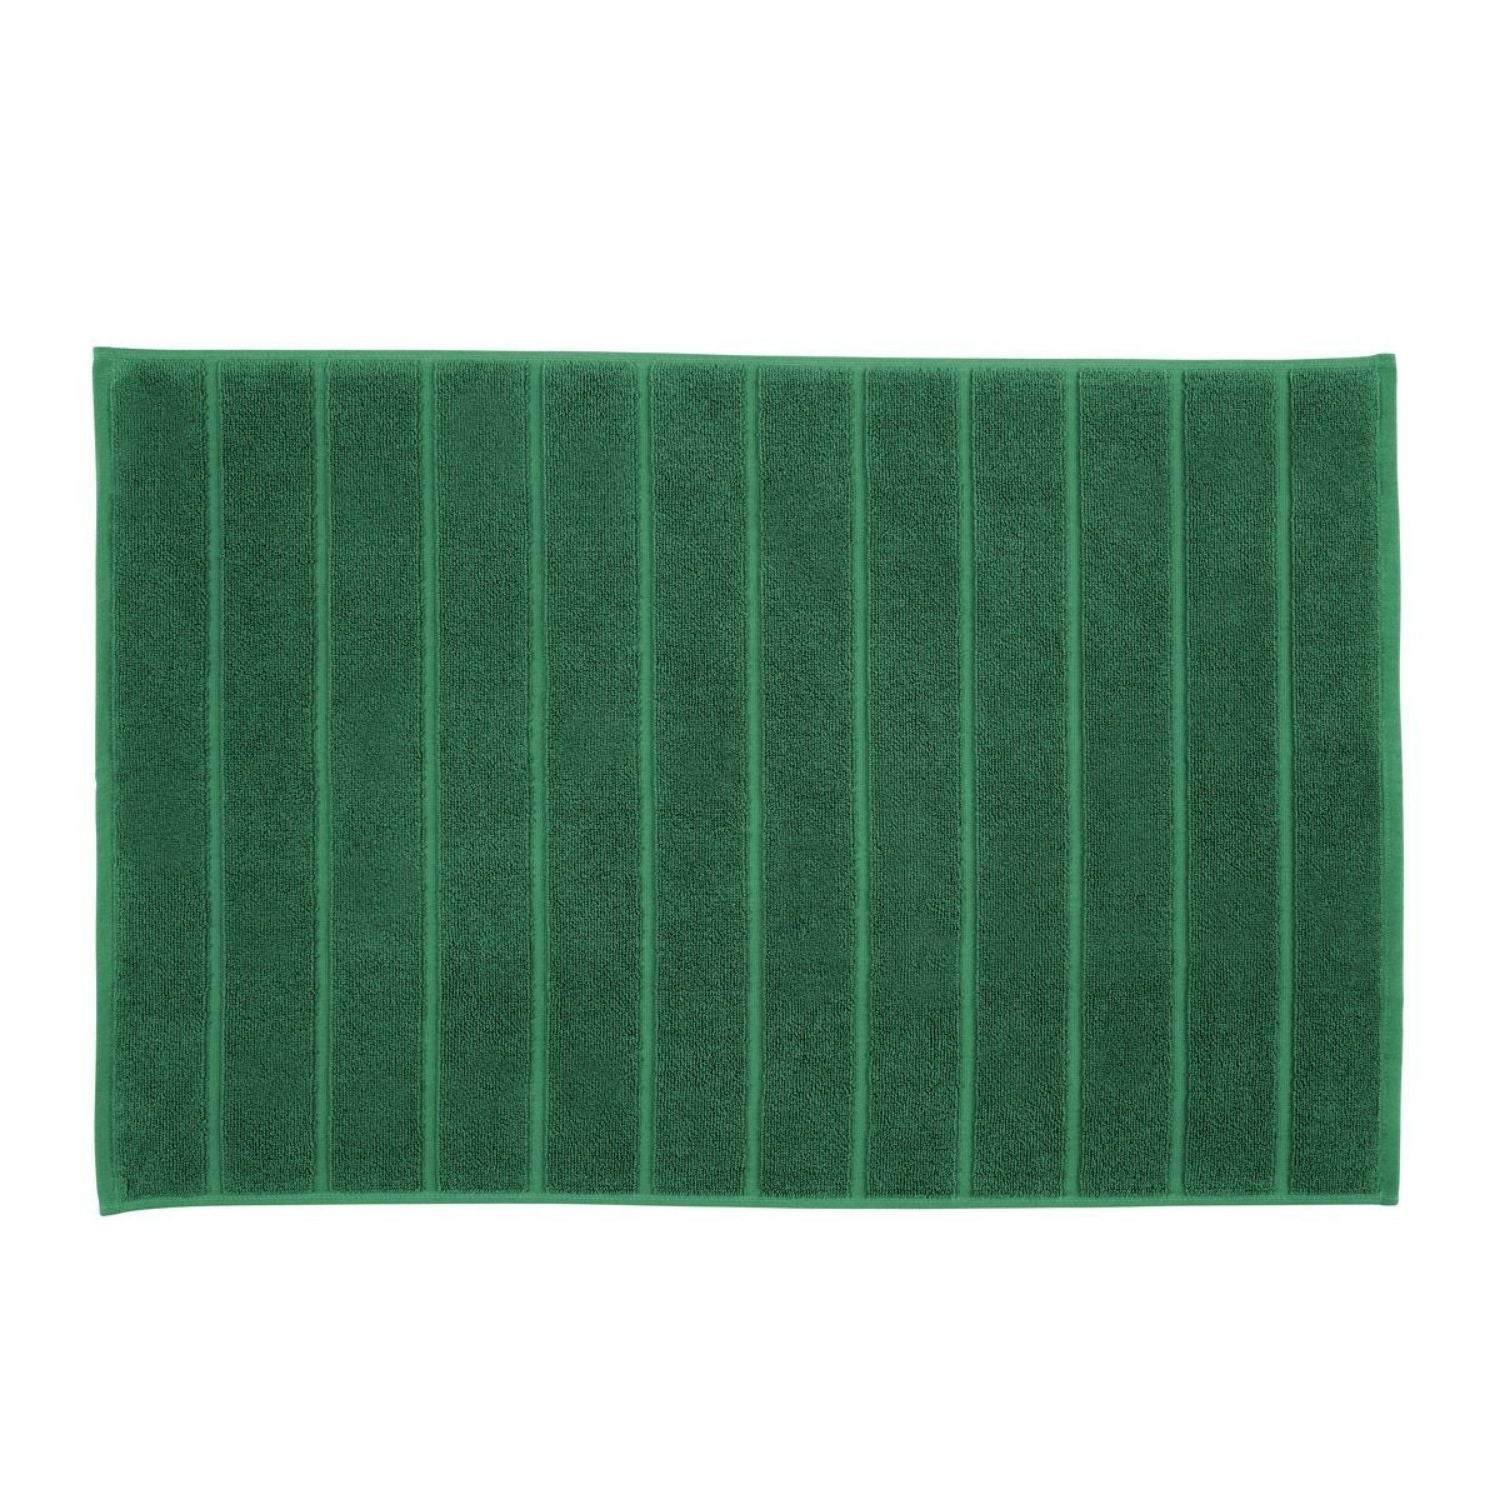 Christy Chroma Bath Mat - Forest 1 Shaws Department Stores